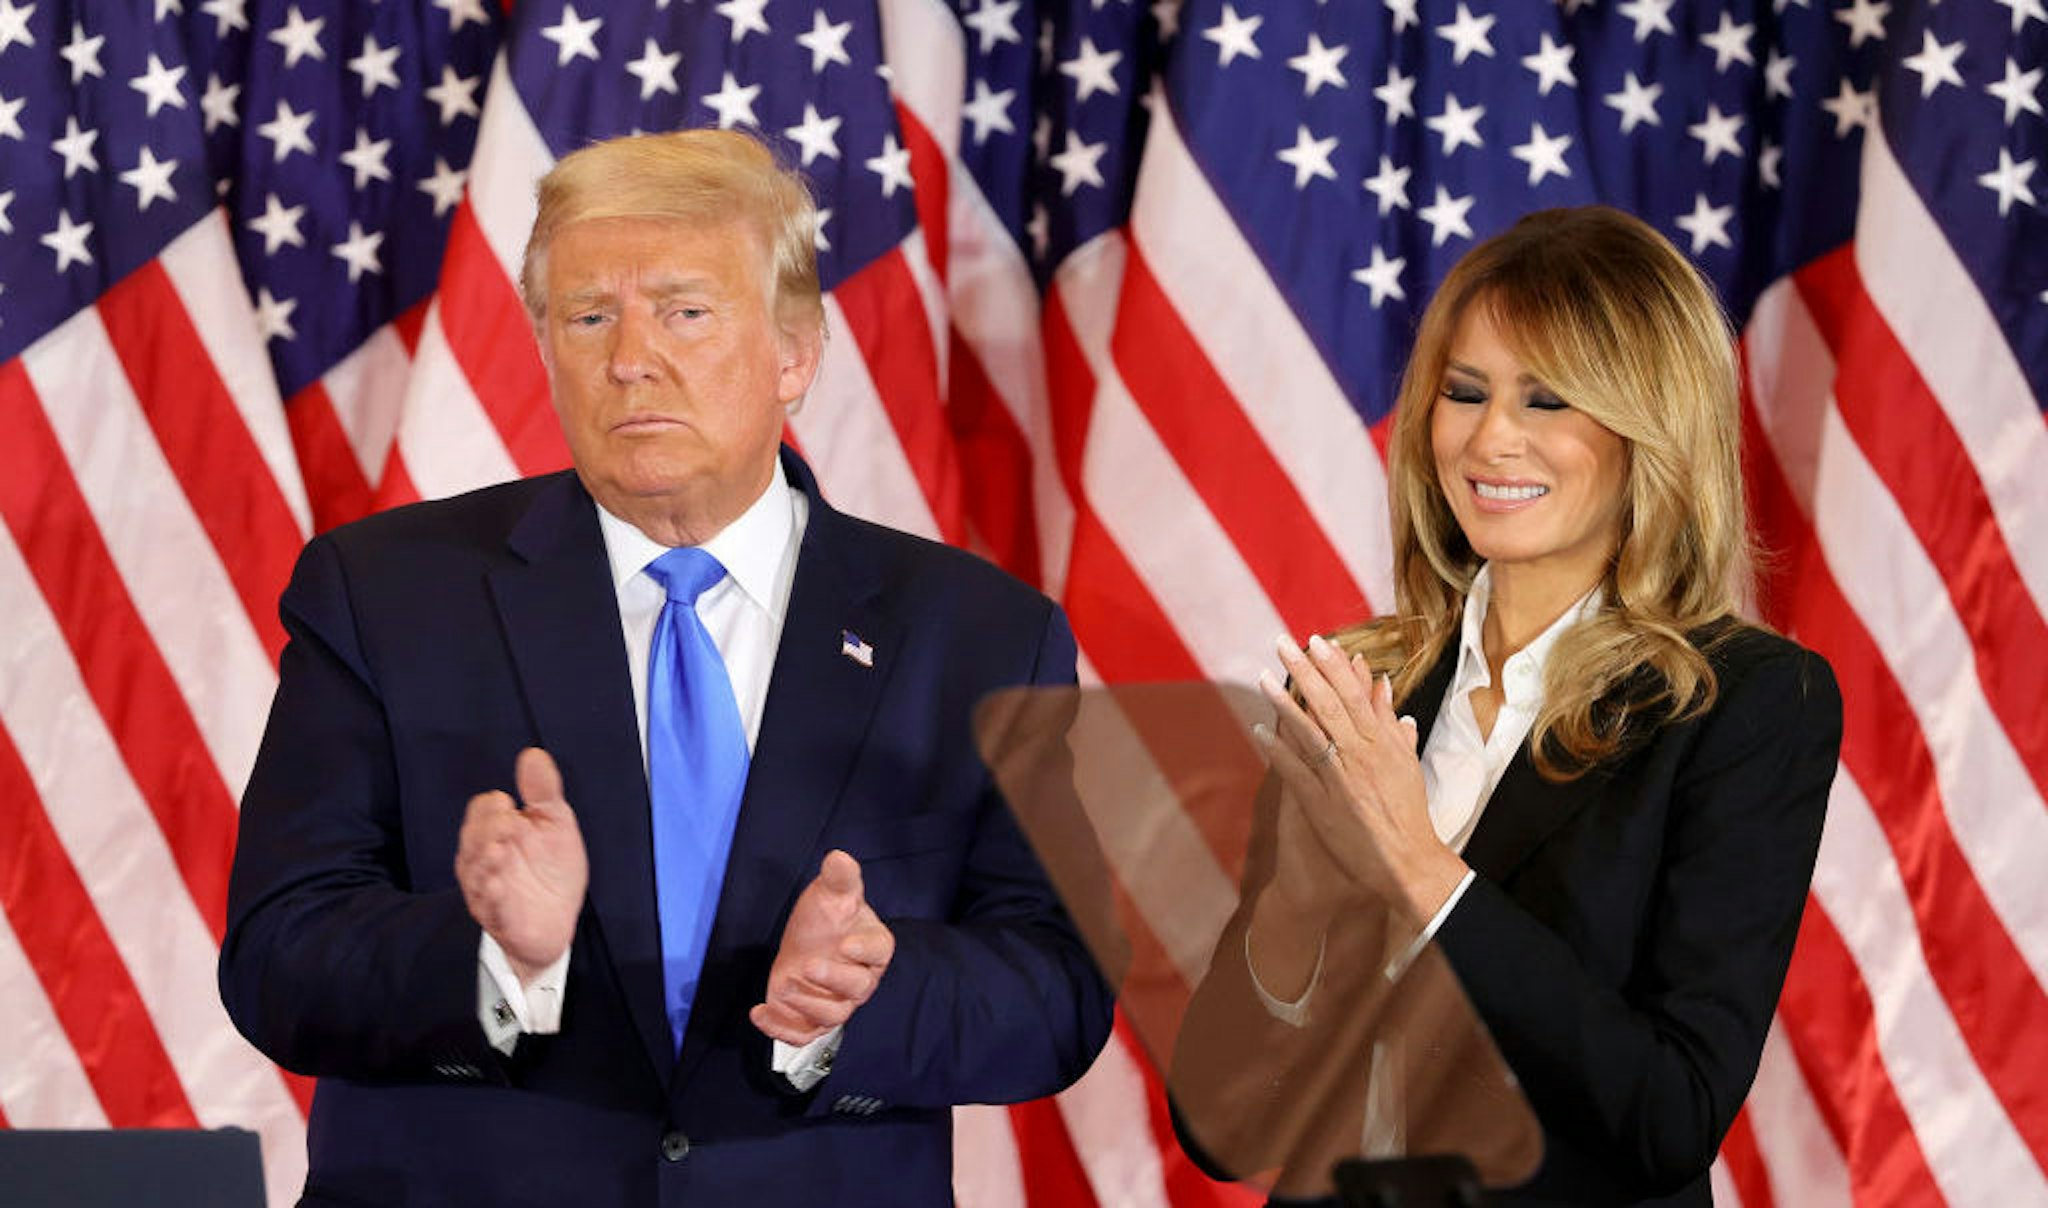 WASHINGTON, DC - NOVEMBER 04: U.S. President Donald Trump and first lady Melania Trump take the stage on election night in the East Room of the White House in the early morning hours of November 04, 2020 in Washington, DC. Trump spoke shortly after 2am with the presidential race against Democratic presidential nominee Joe Biden still too close to call. (Photo by Chip Somodevilla/Getty Images)